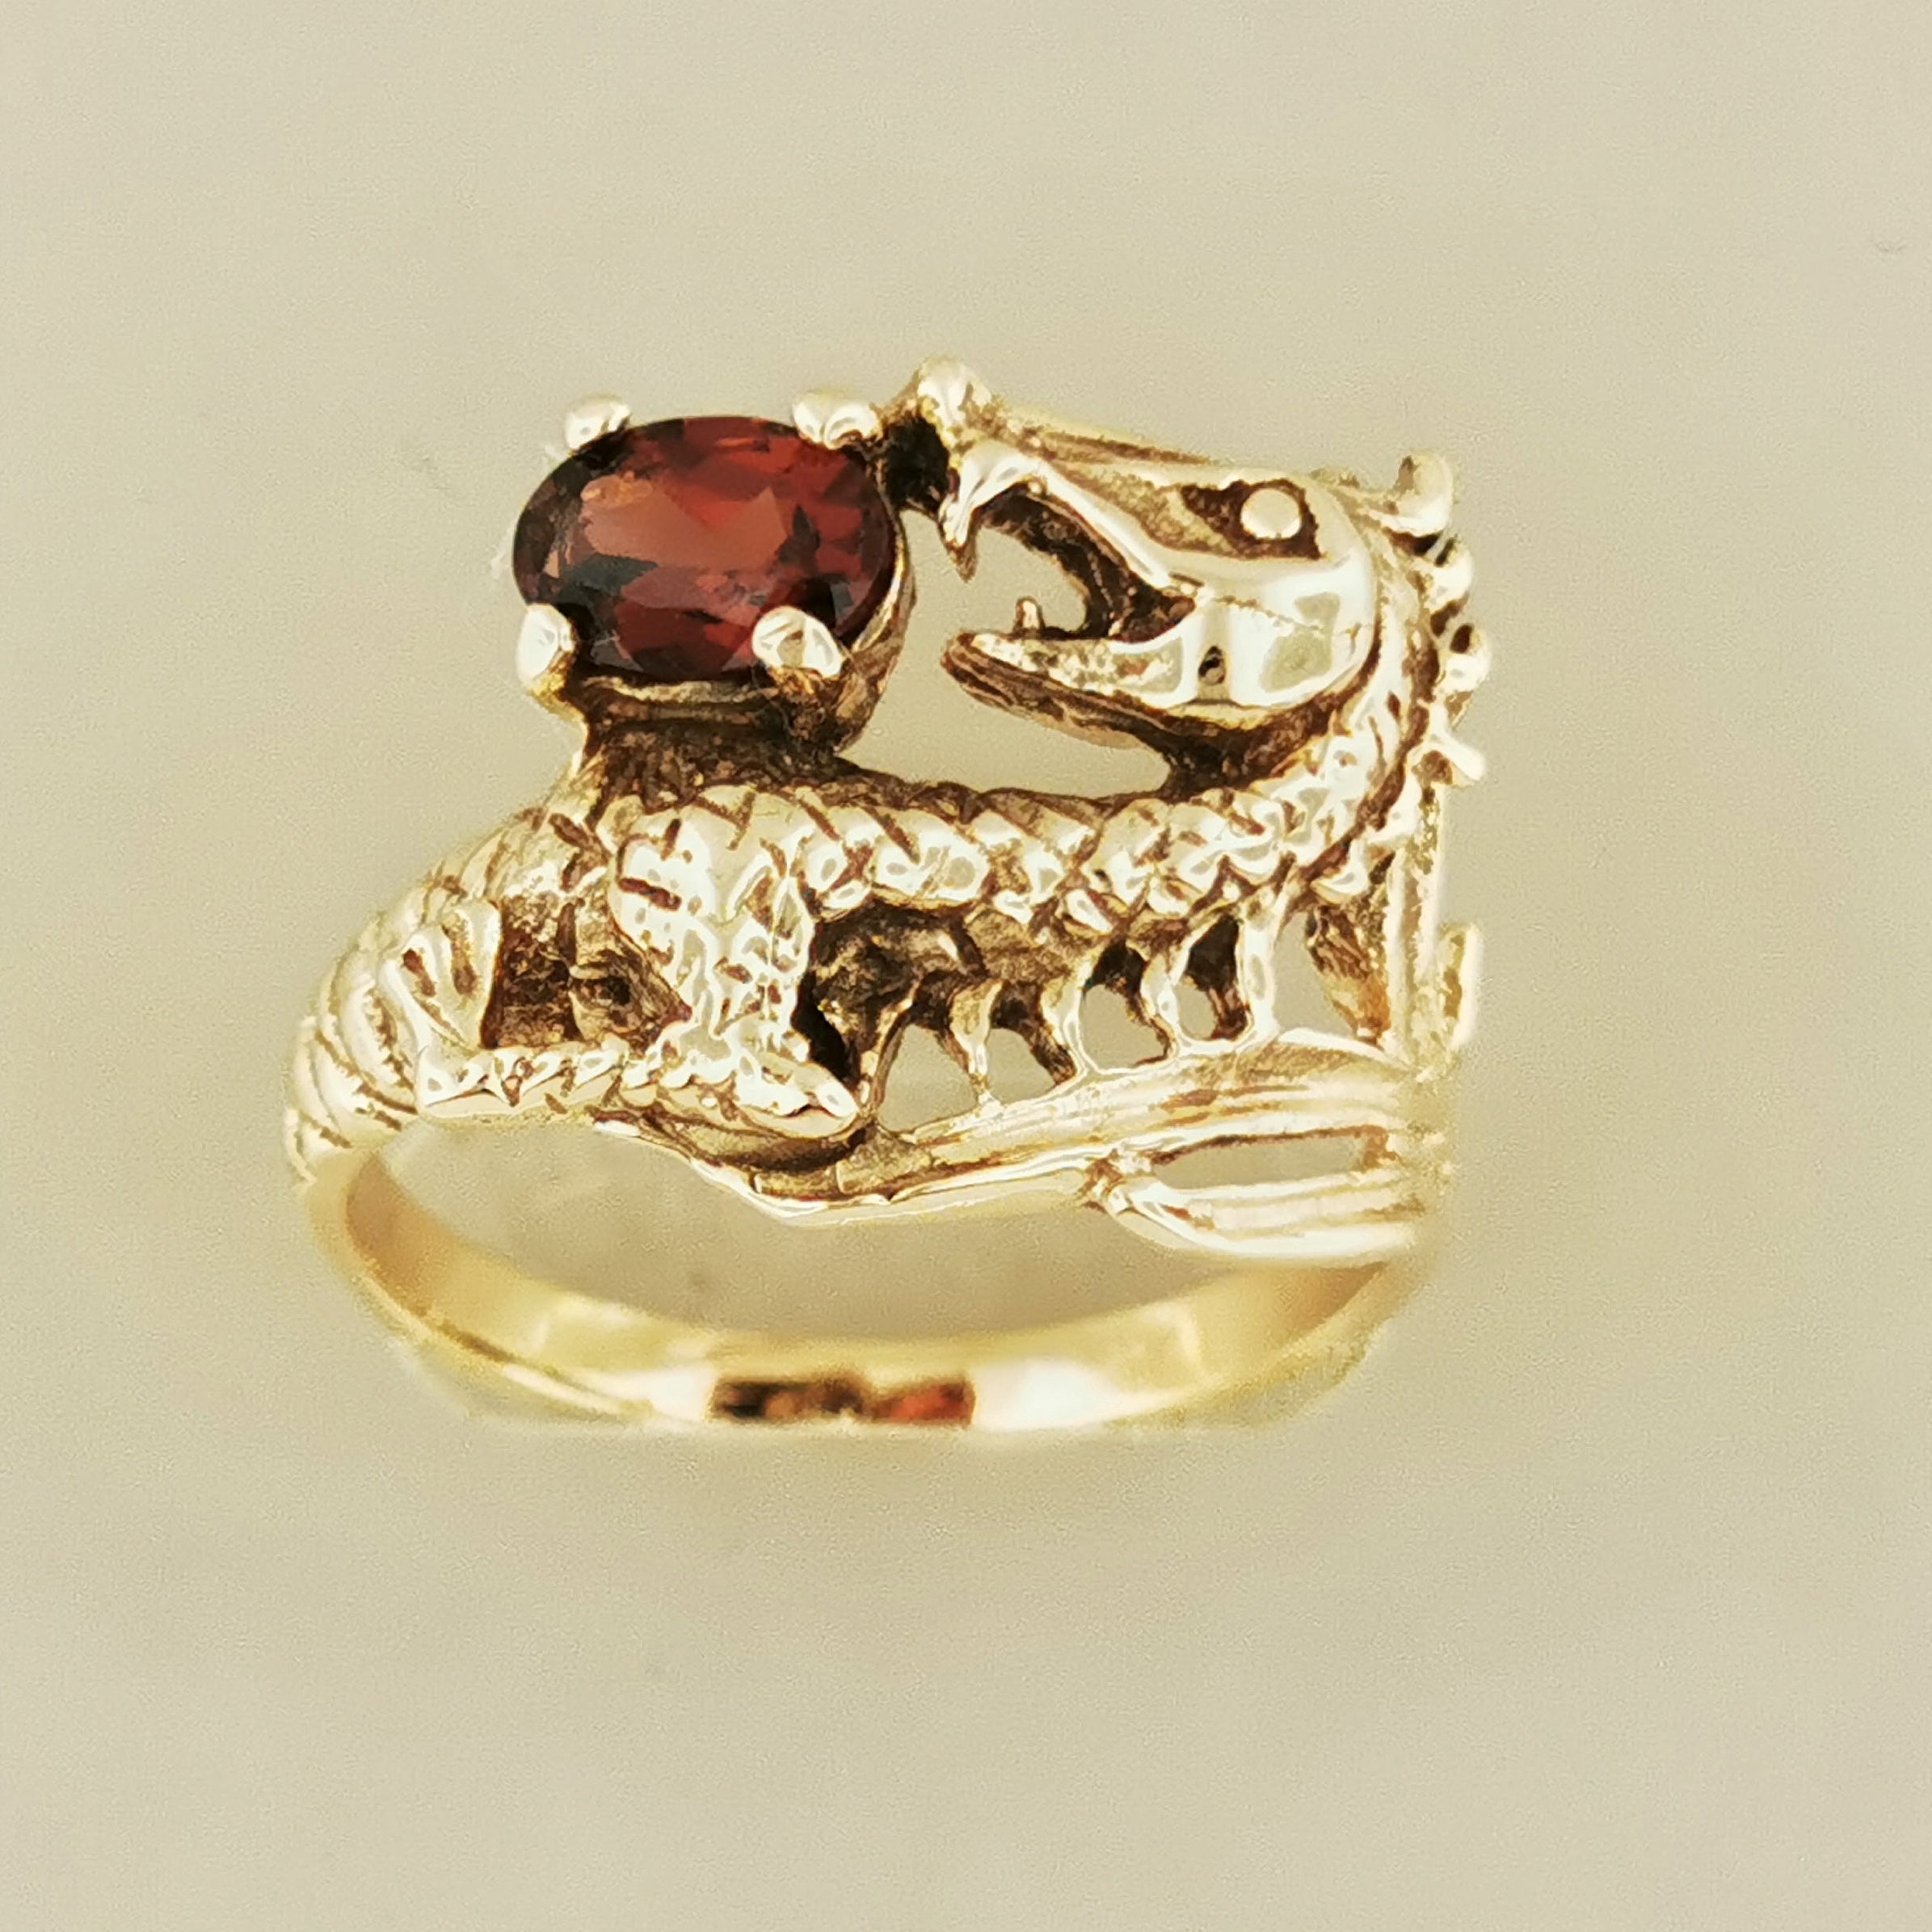 Dragon Ring Yellow Gold Diamond Mouth & Created Ruby Eyes